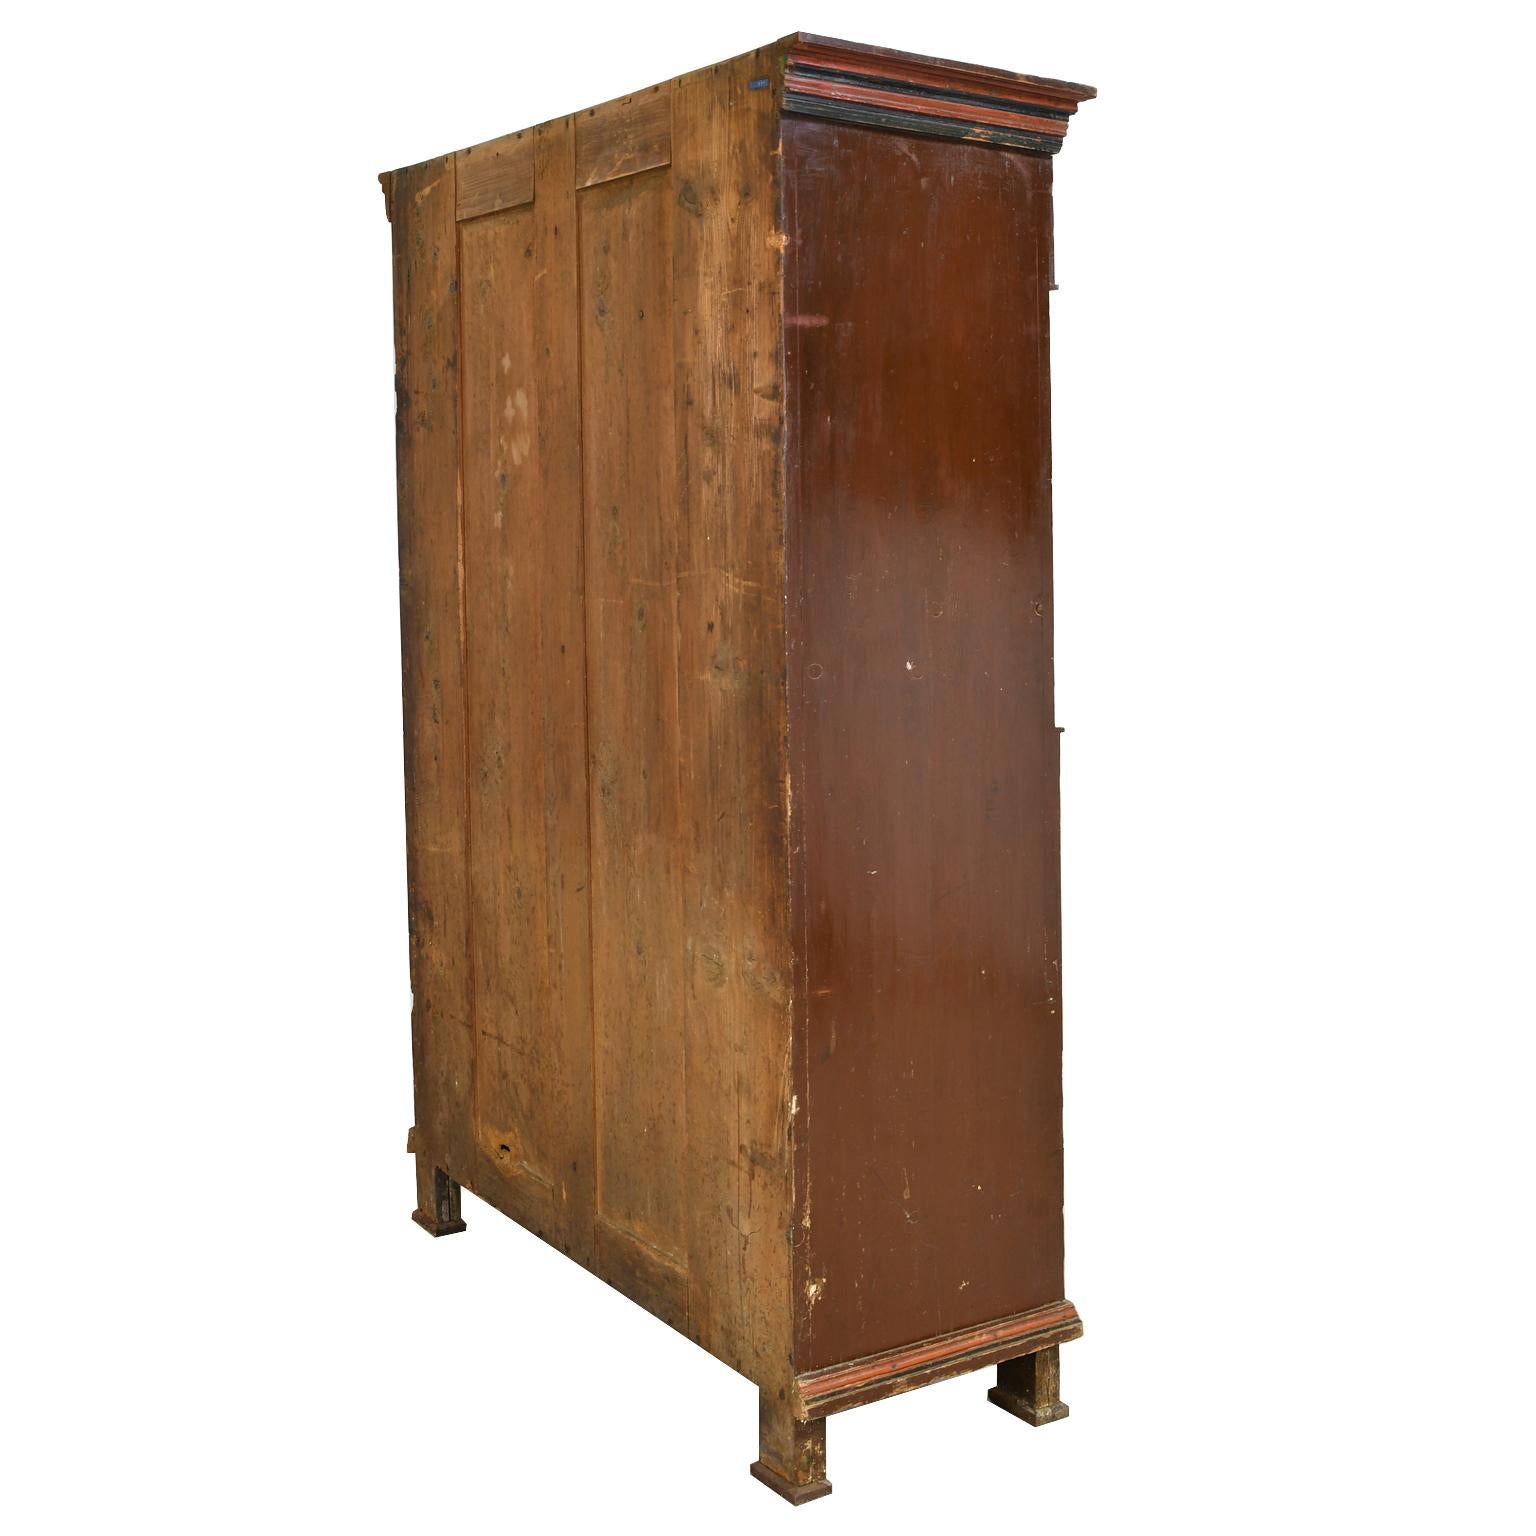 Hand-Crafted Antique 19th Century Dowry or Wedding Armoire w/ Maroon Paint & Floral Bouquets